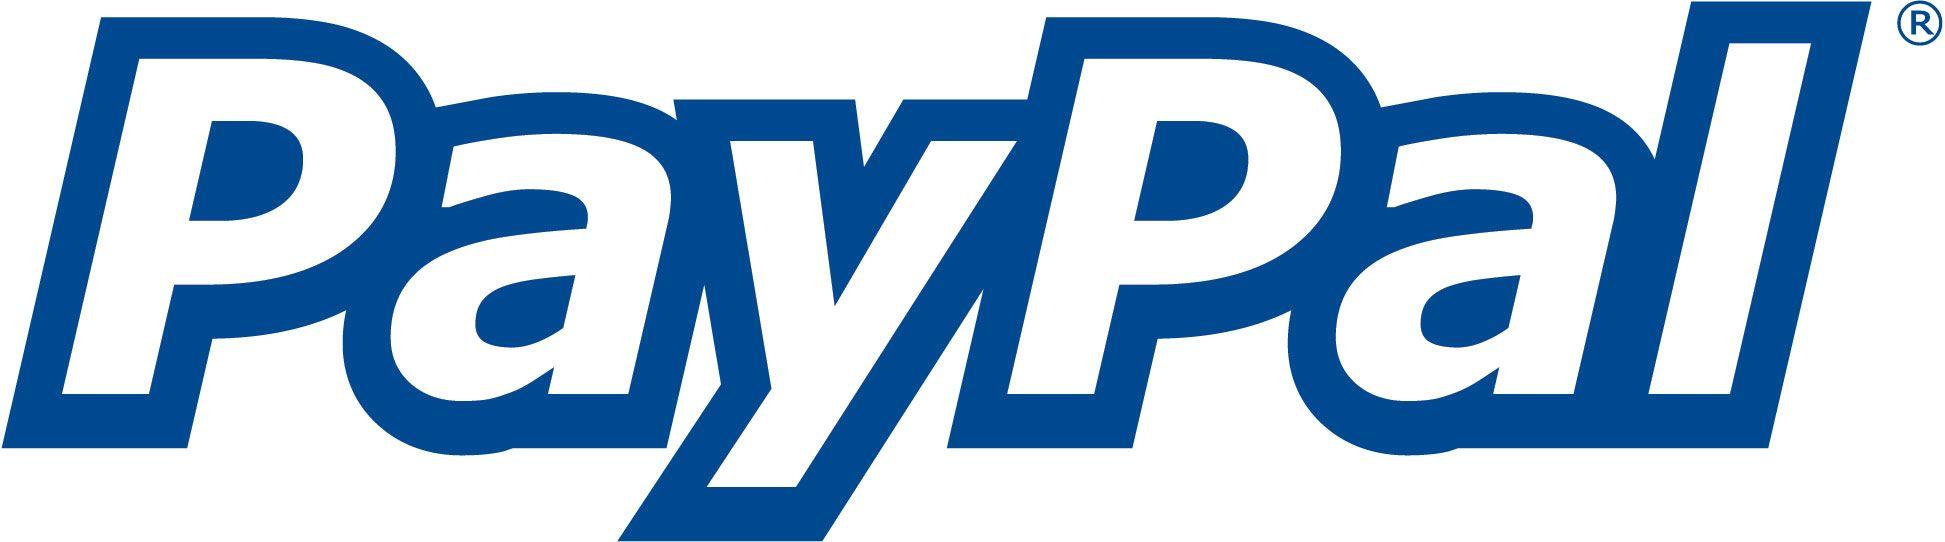 Old PayPal Logo - Image - PayPal logo old.jpg | Logopedia | FANDOM powered by Wikia